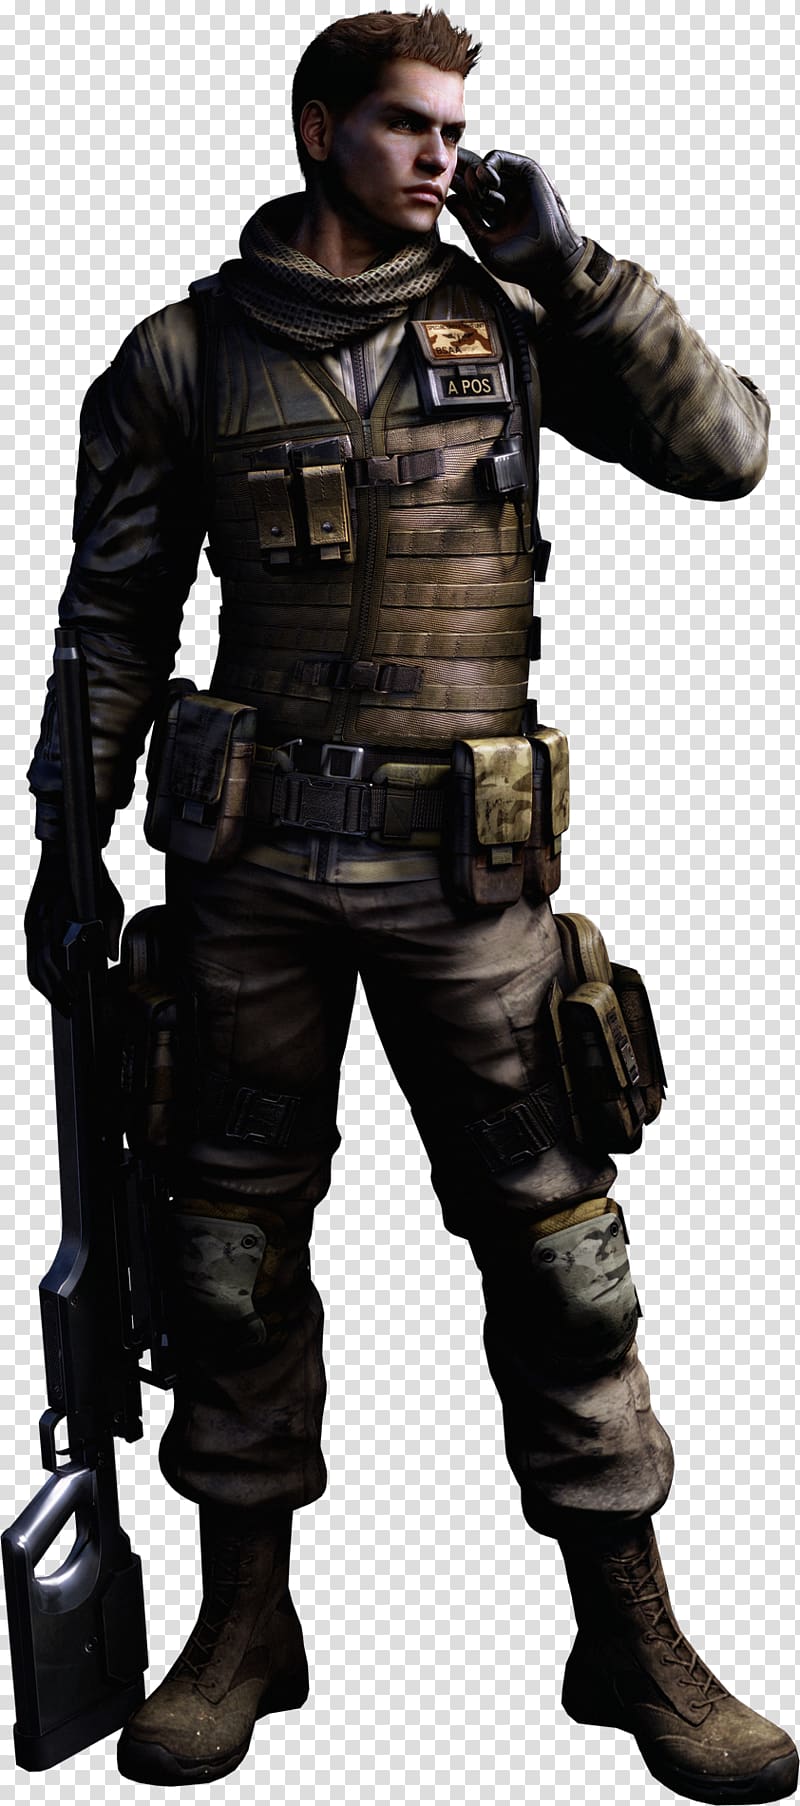 Resident Evil 6 Chris Redfield Leon S. Kennedy Claire Redfield, resident evil transparent background PNG clipart